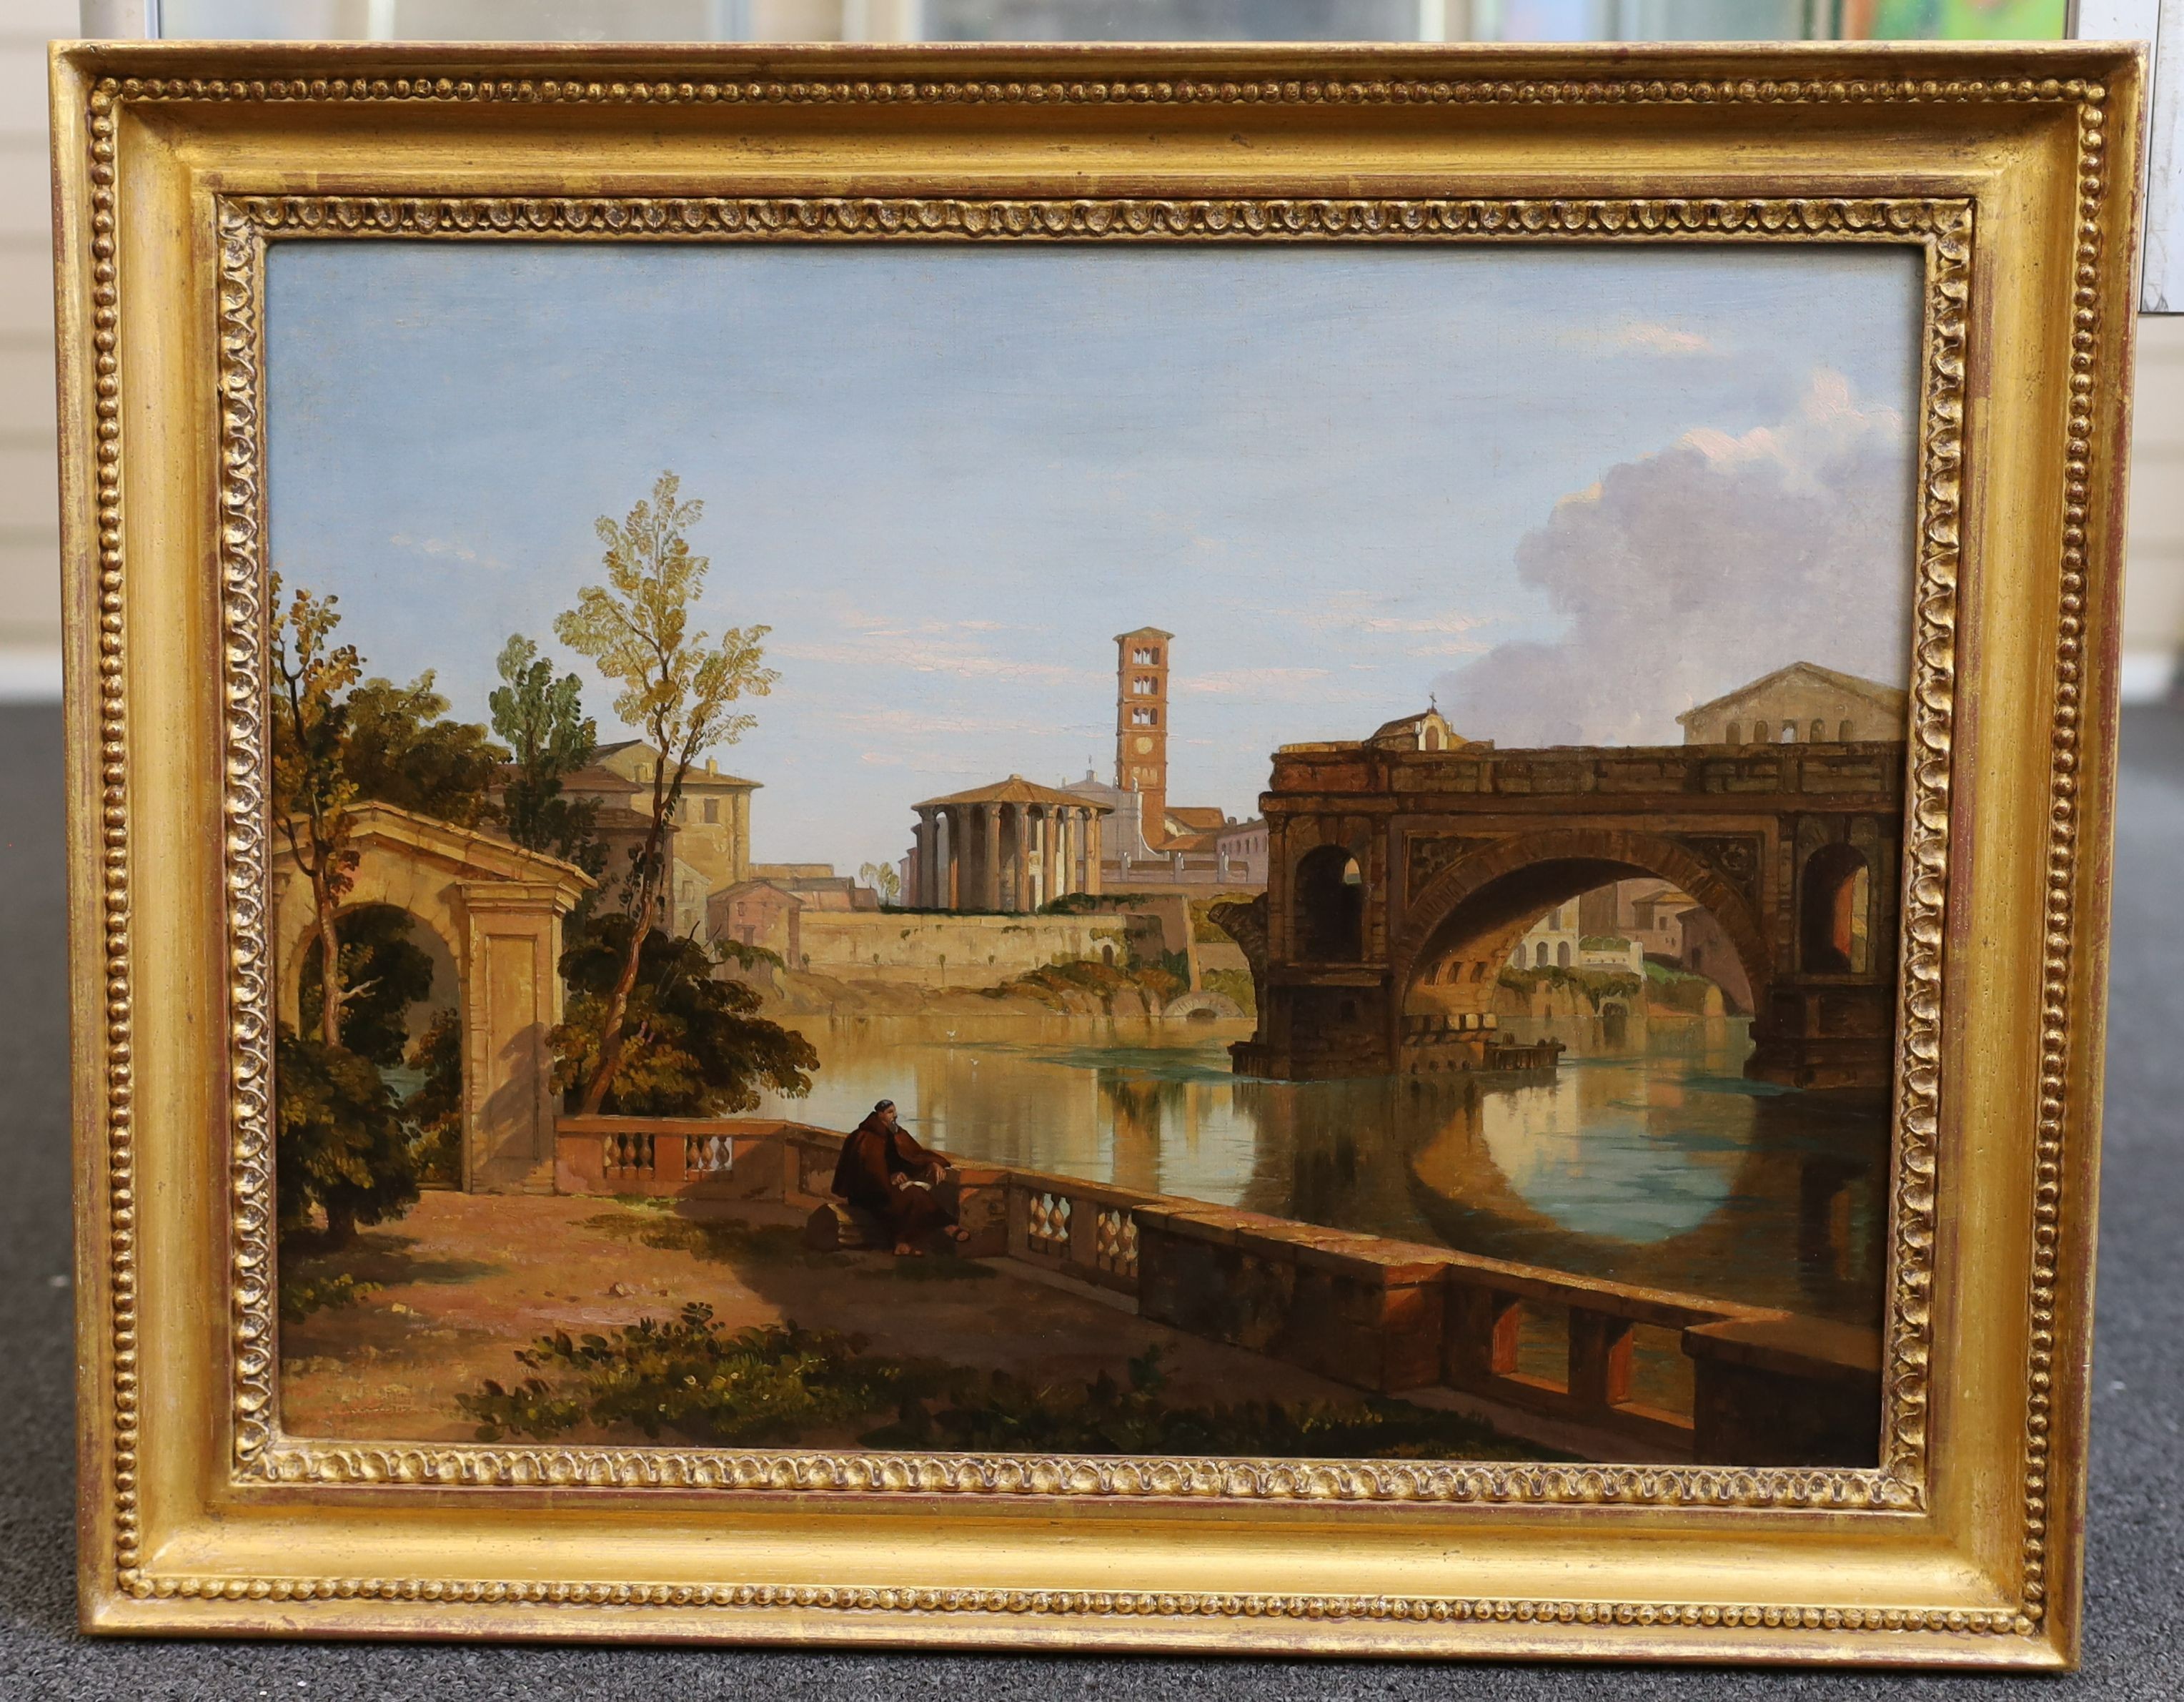 Attributed to Penry Williams (1800-1885), A view on the Tiber looking towards the Palantine Hill with Santa Maria in Cosmedin and the Temple of Vesta, oil on canvas, 34 x 45cm